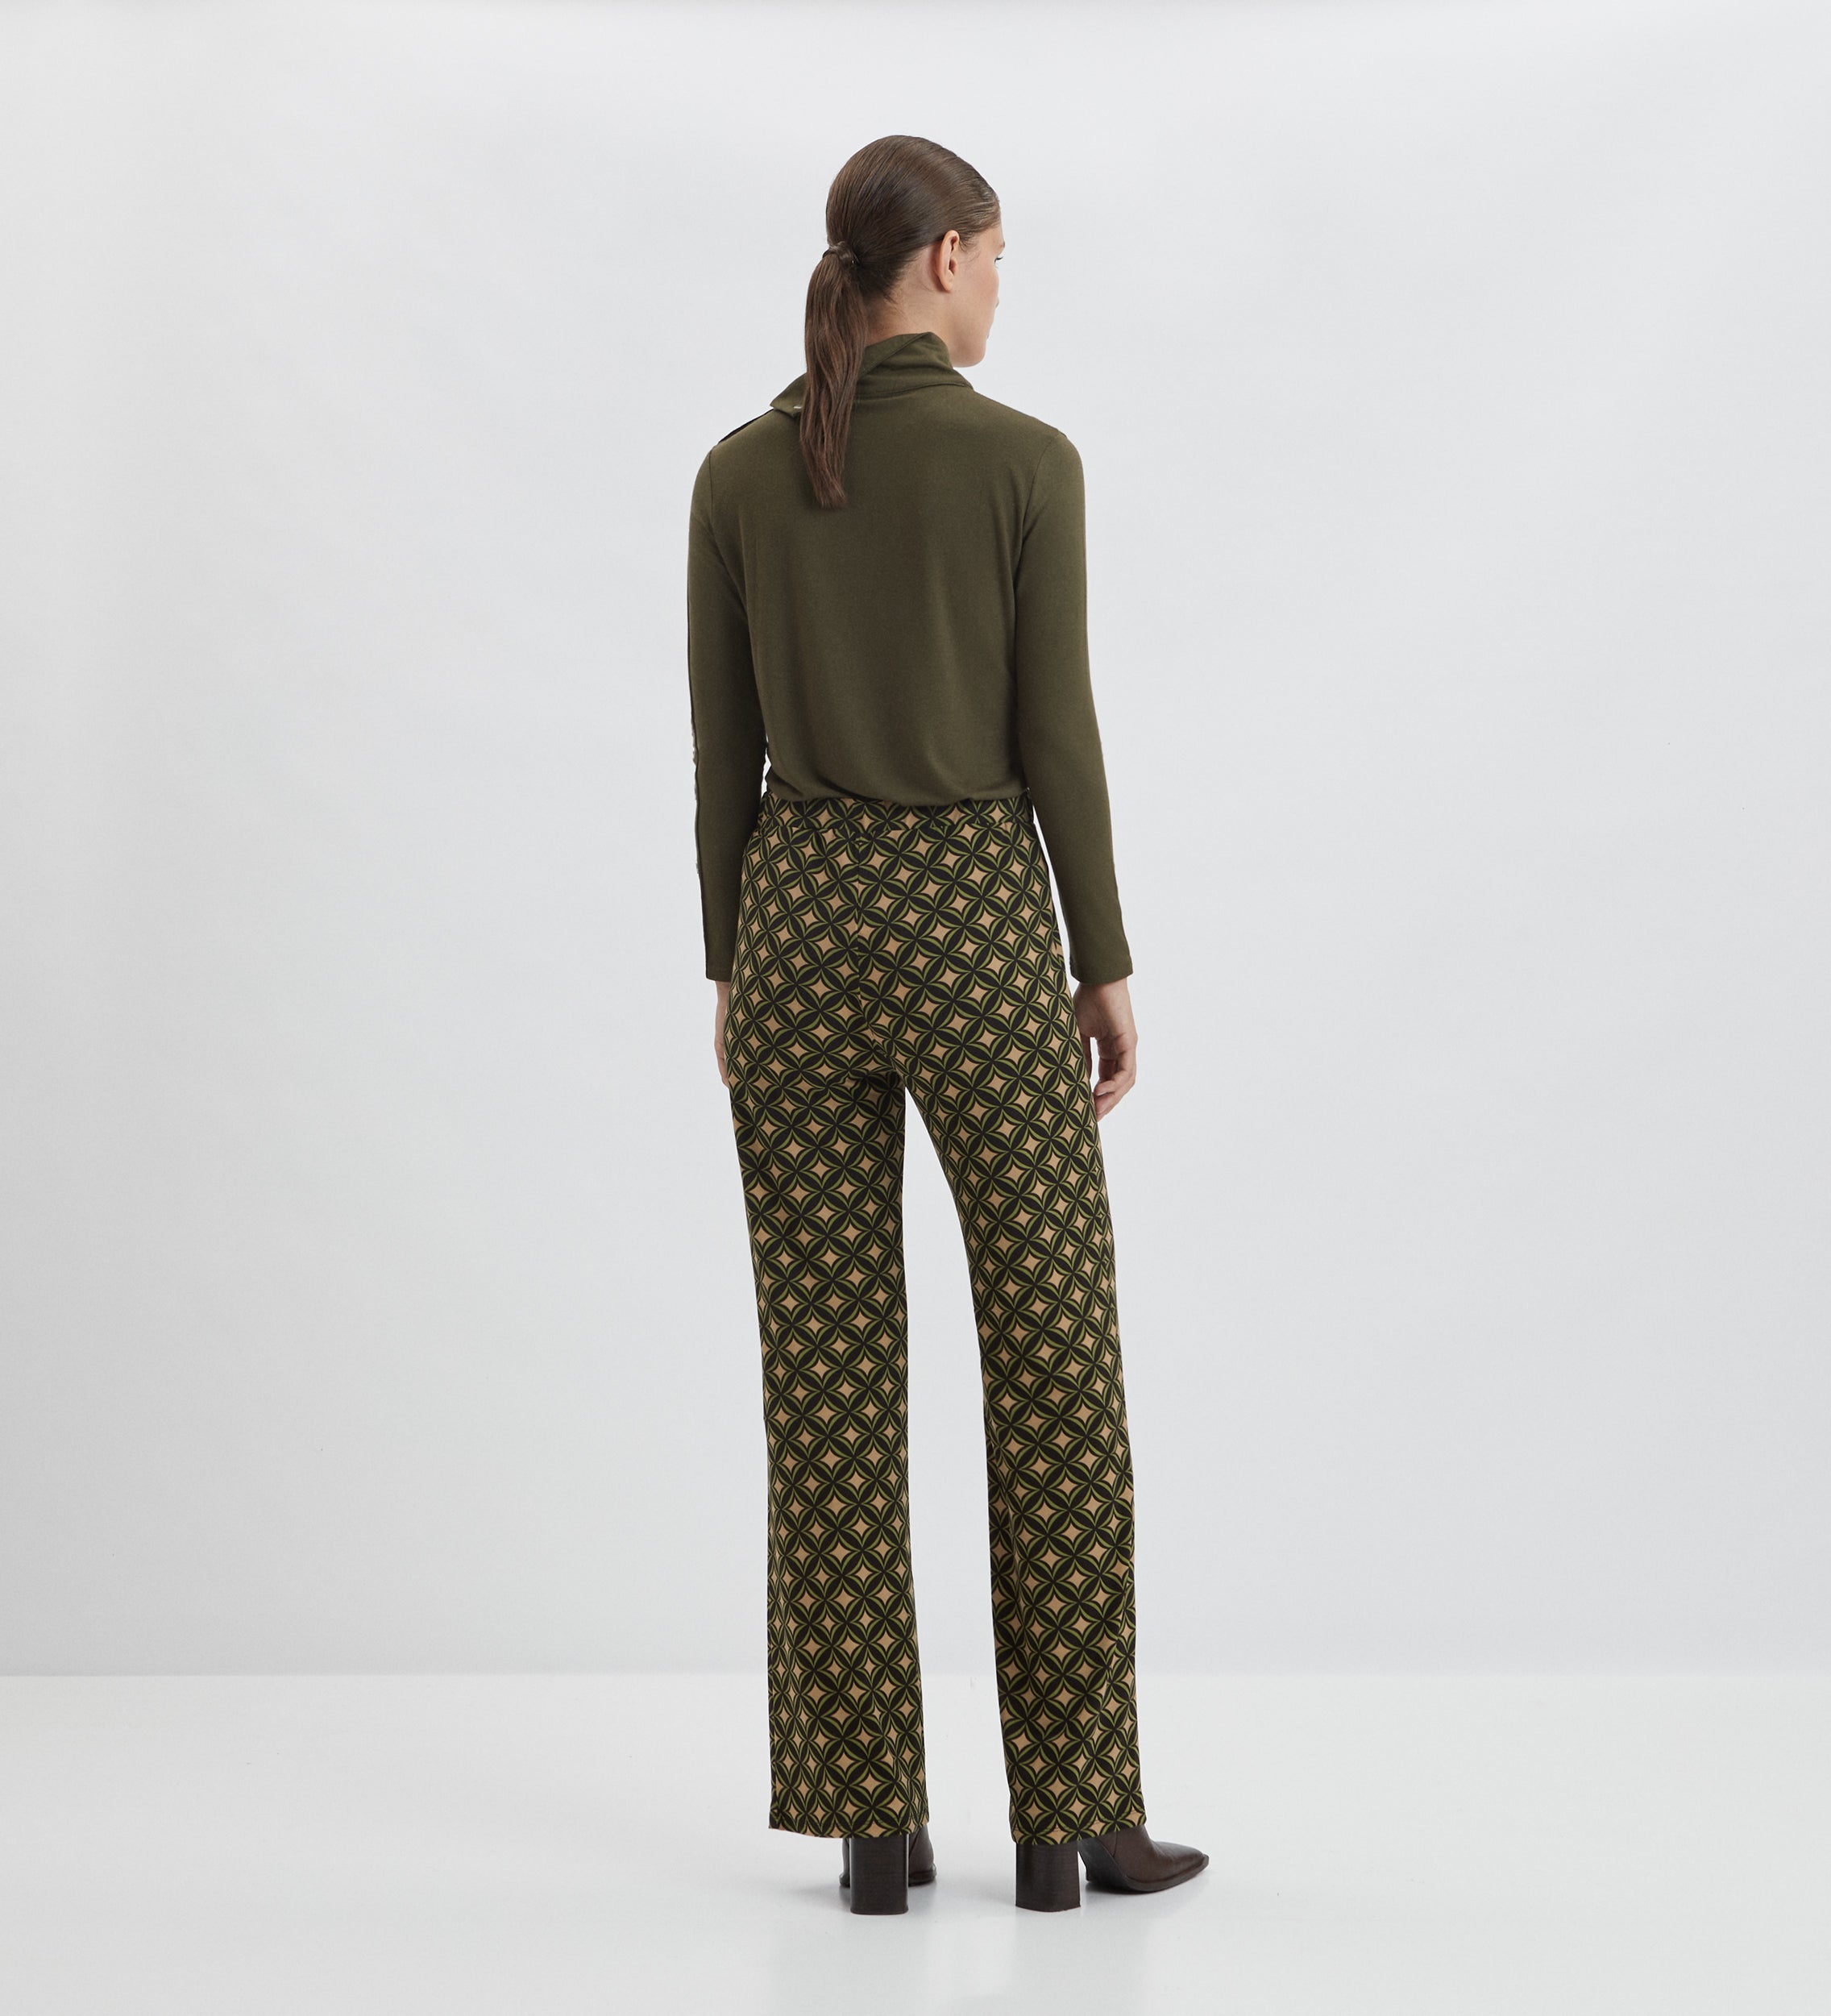 Straight patterned knit trousers